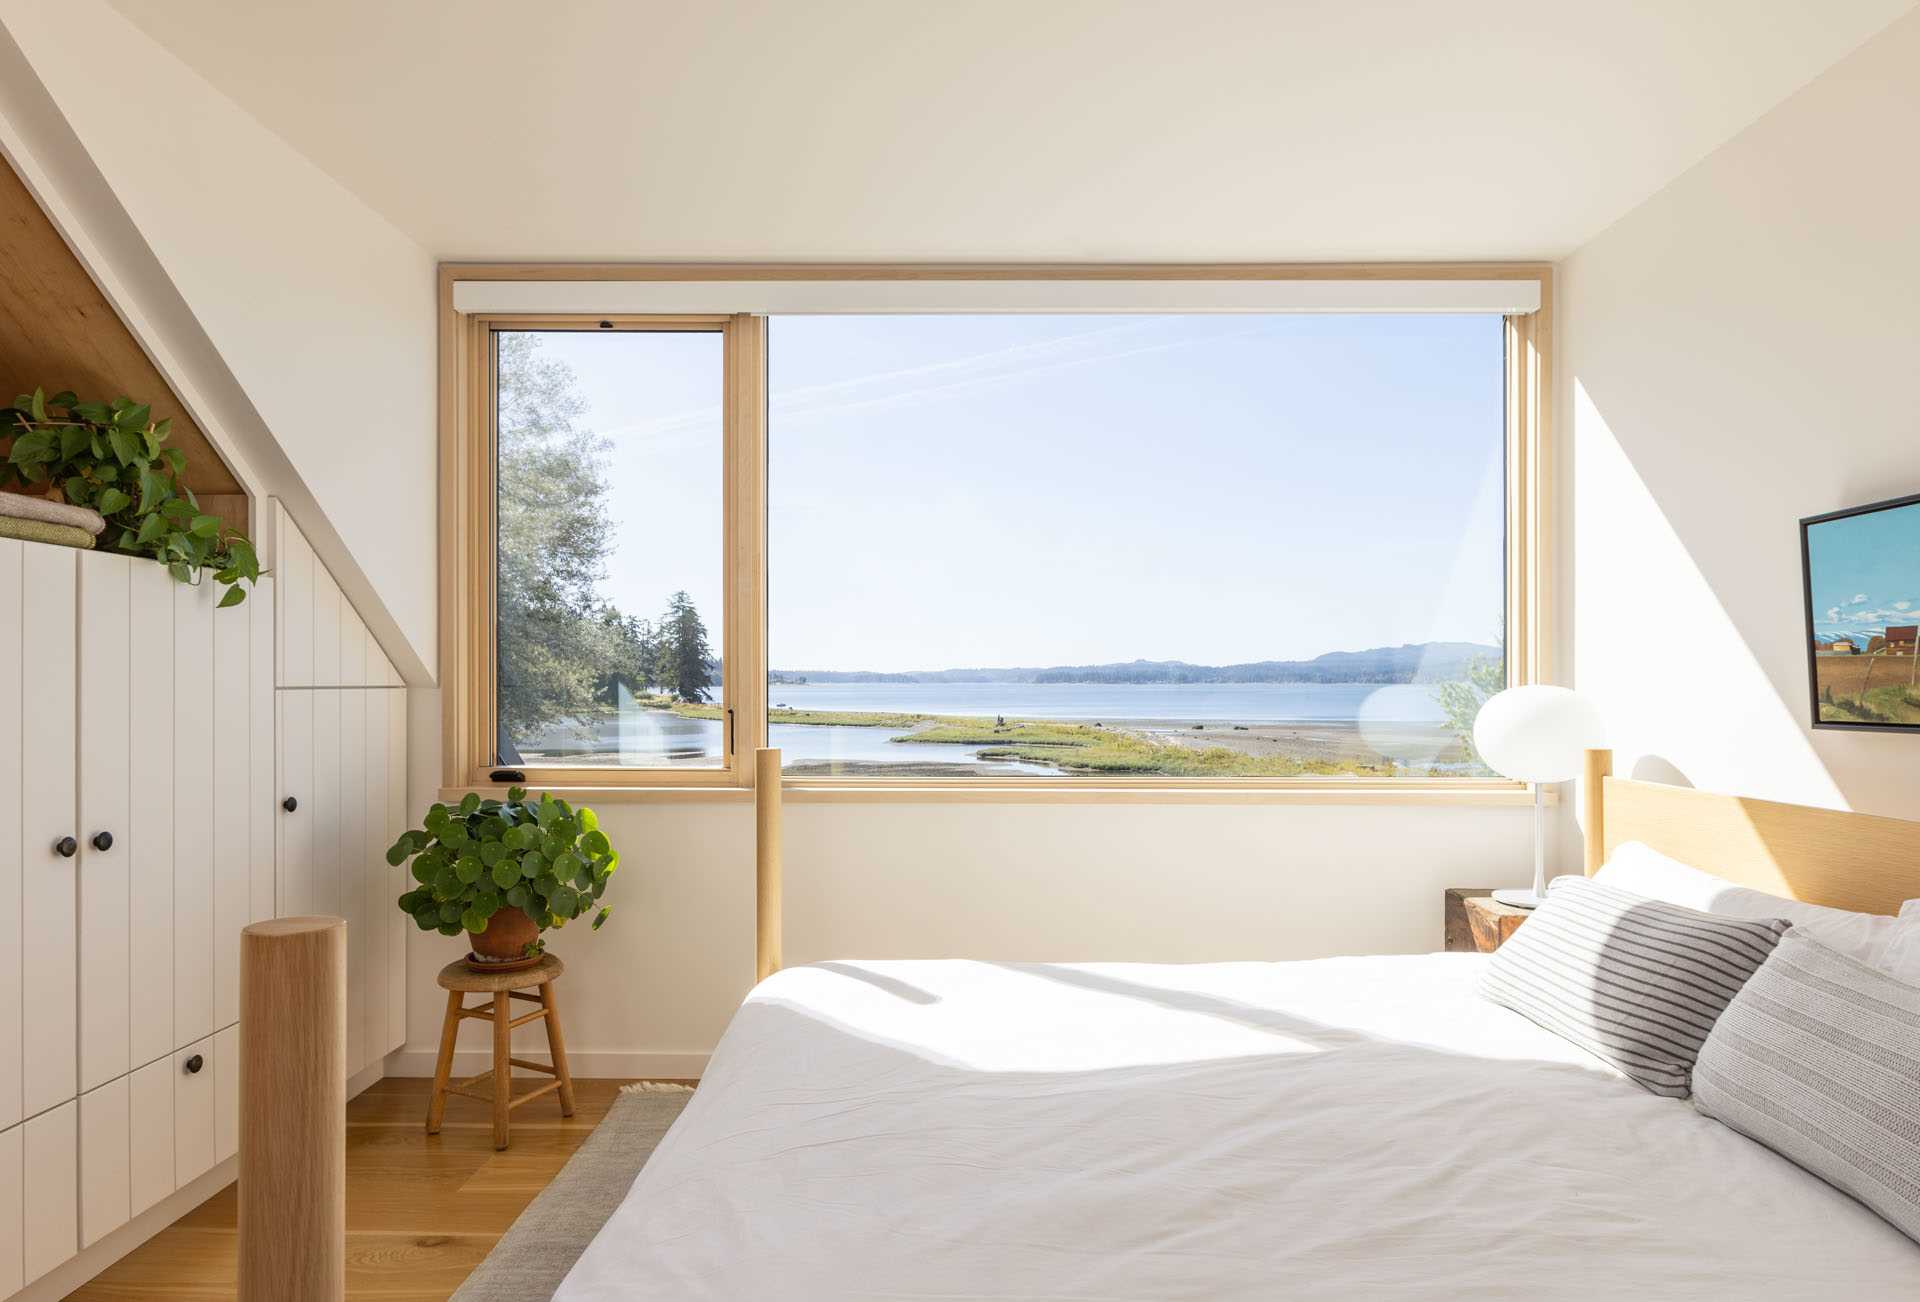 A contemporary farmhouse-inspired bedroom with a picture window, built-in storage, and a window beach.